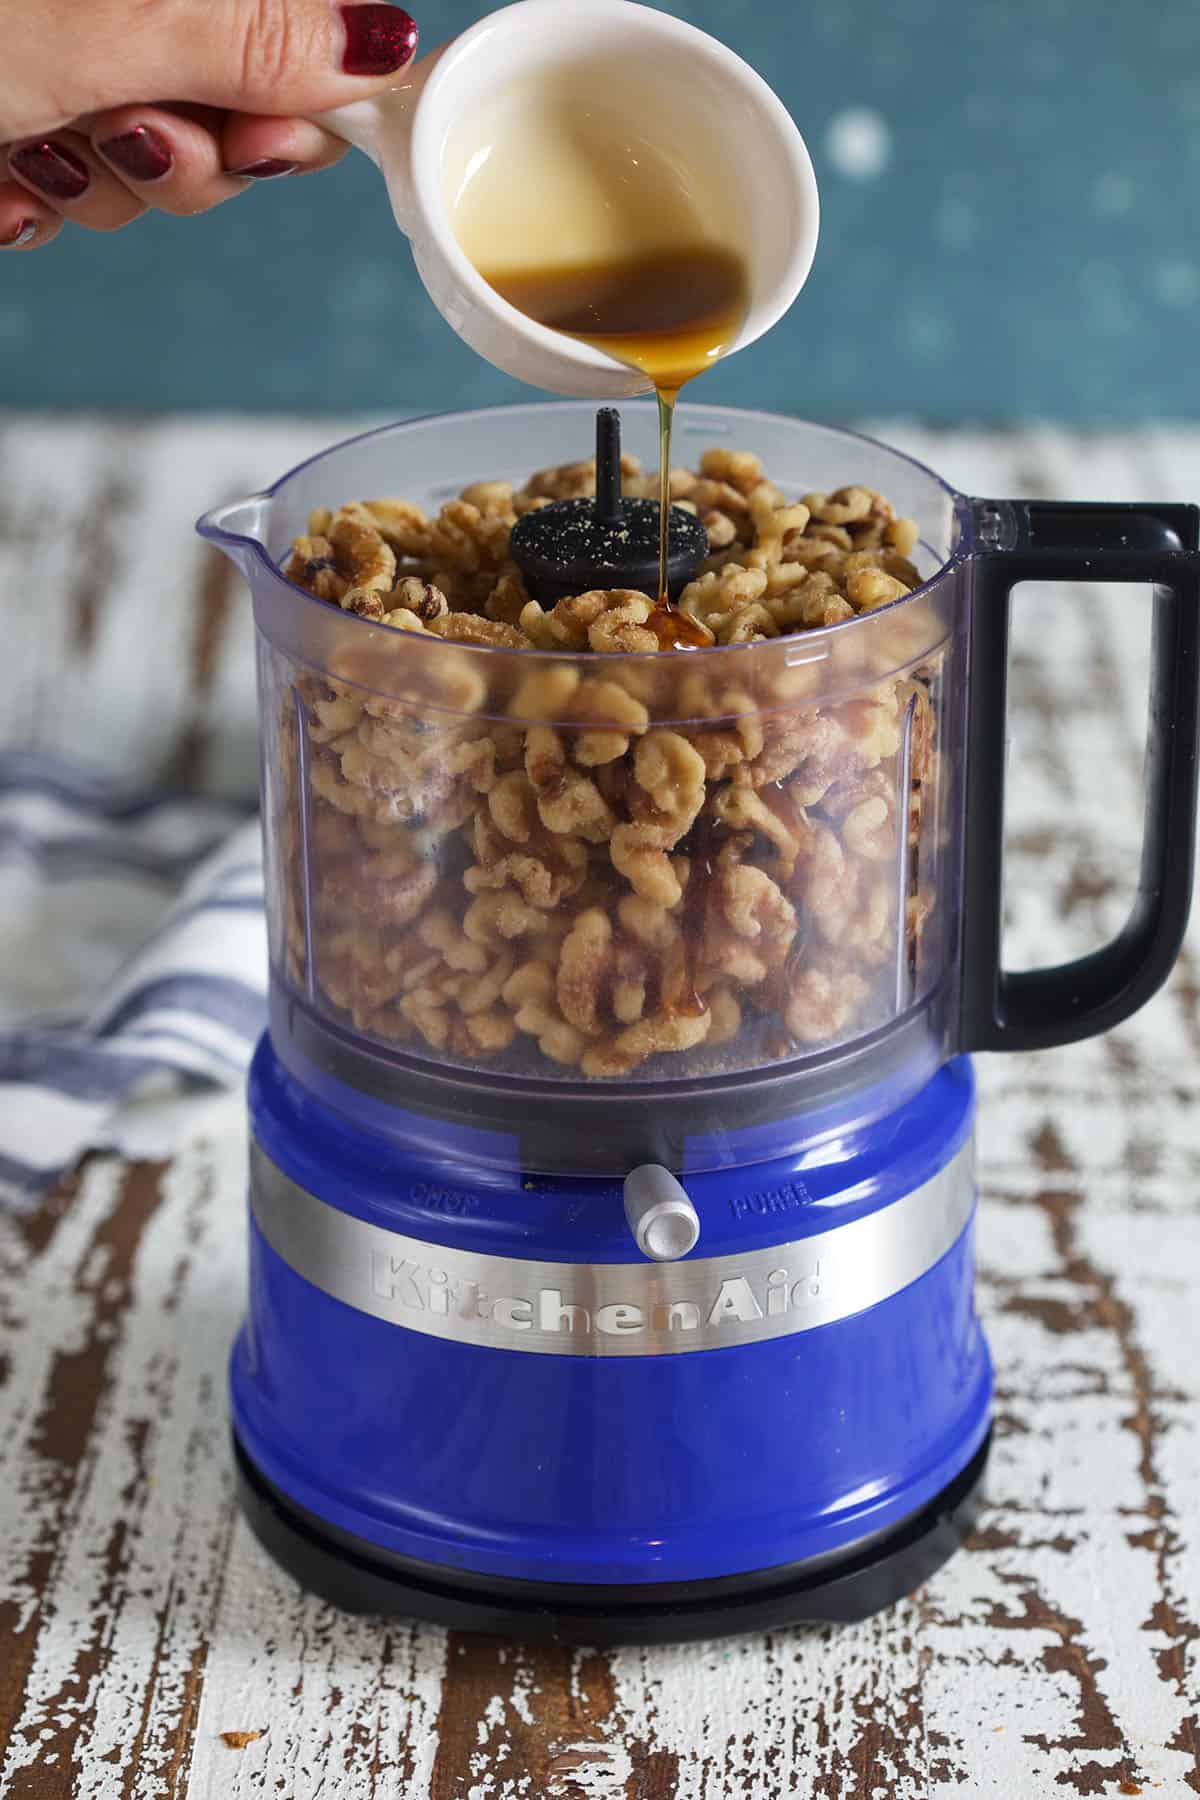 Maple syrup is being poured into a food processor filled with walnuts.